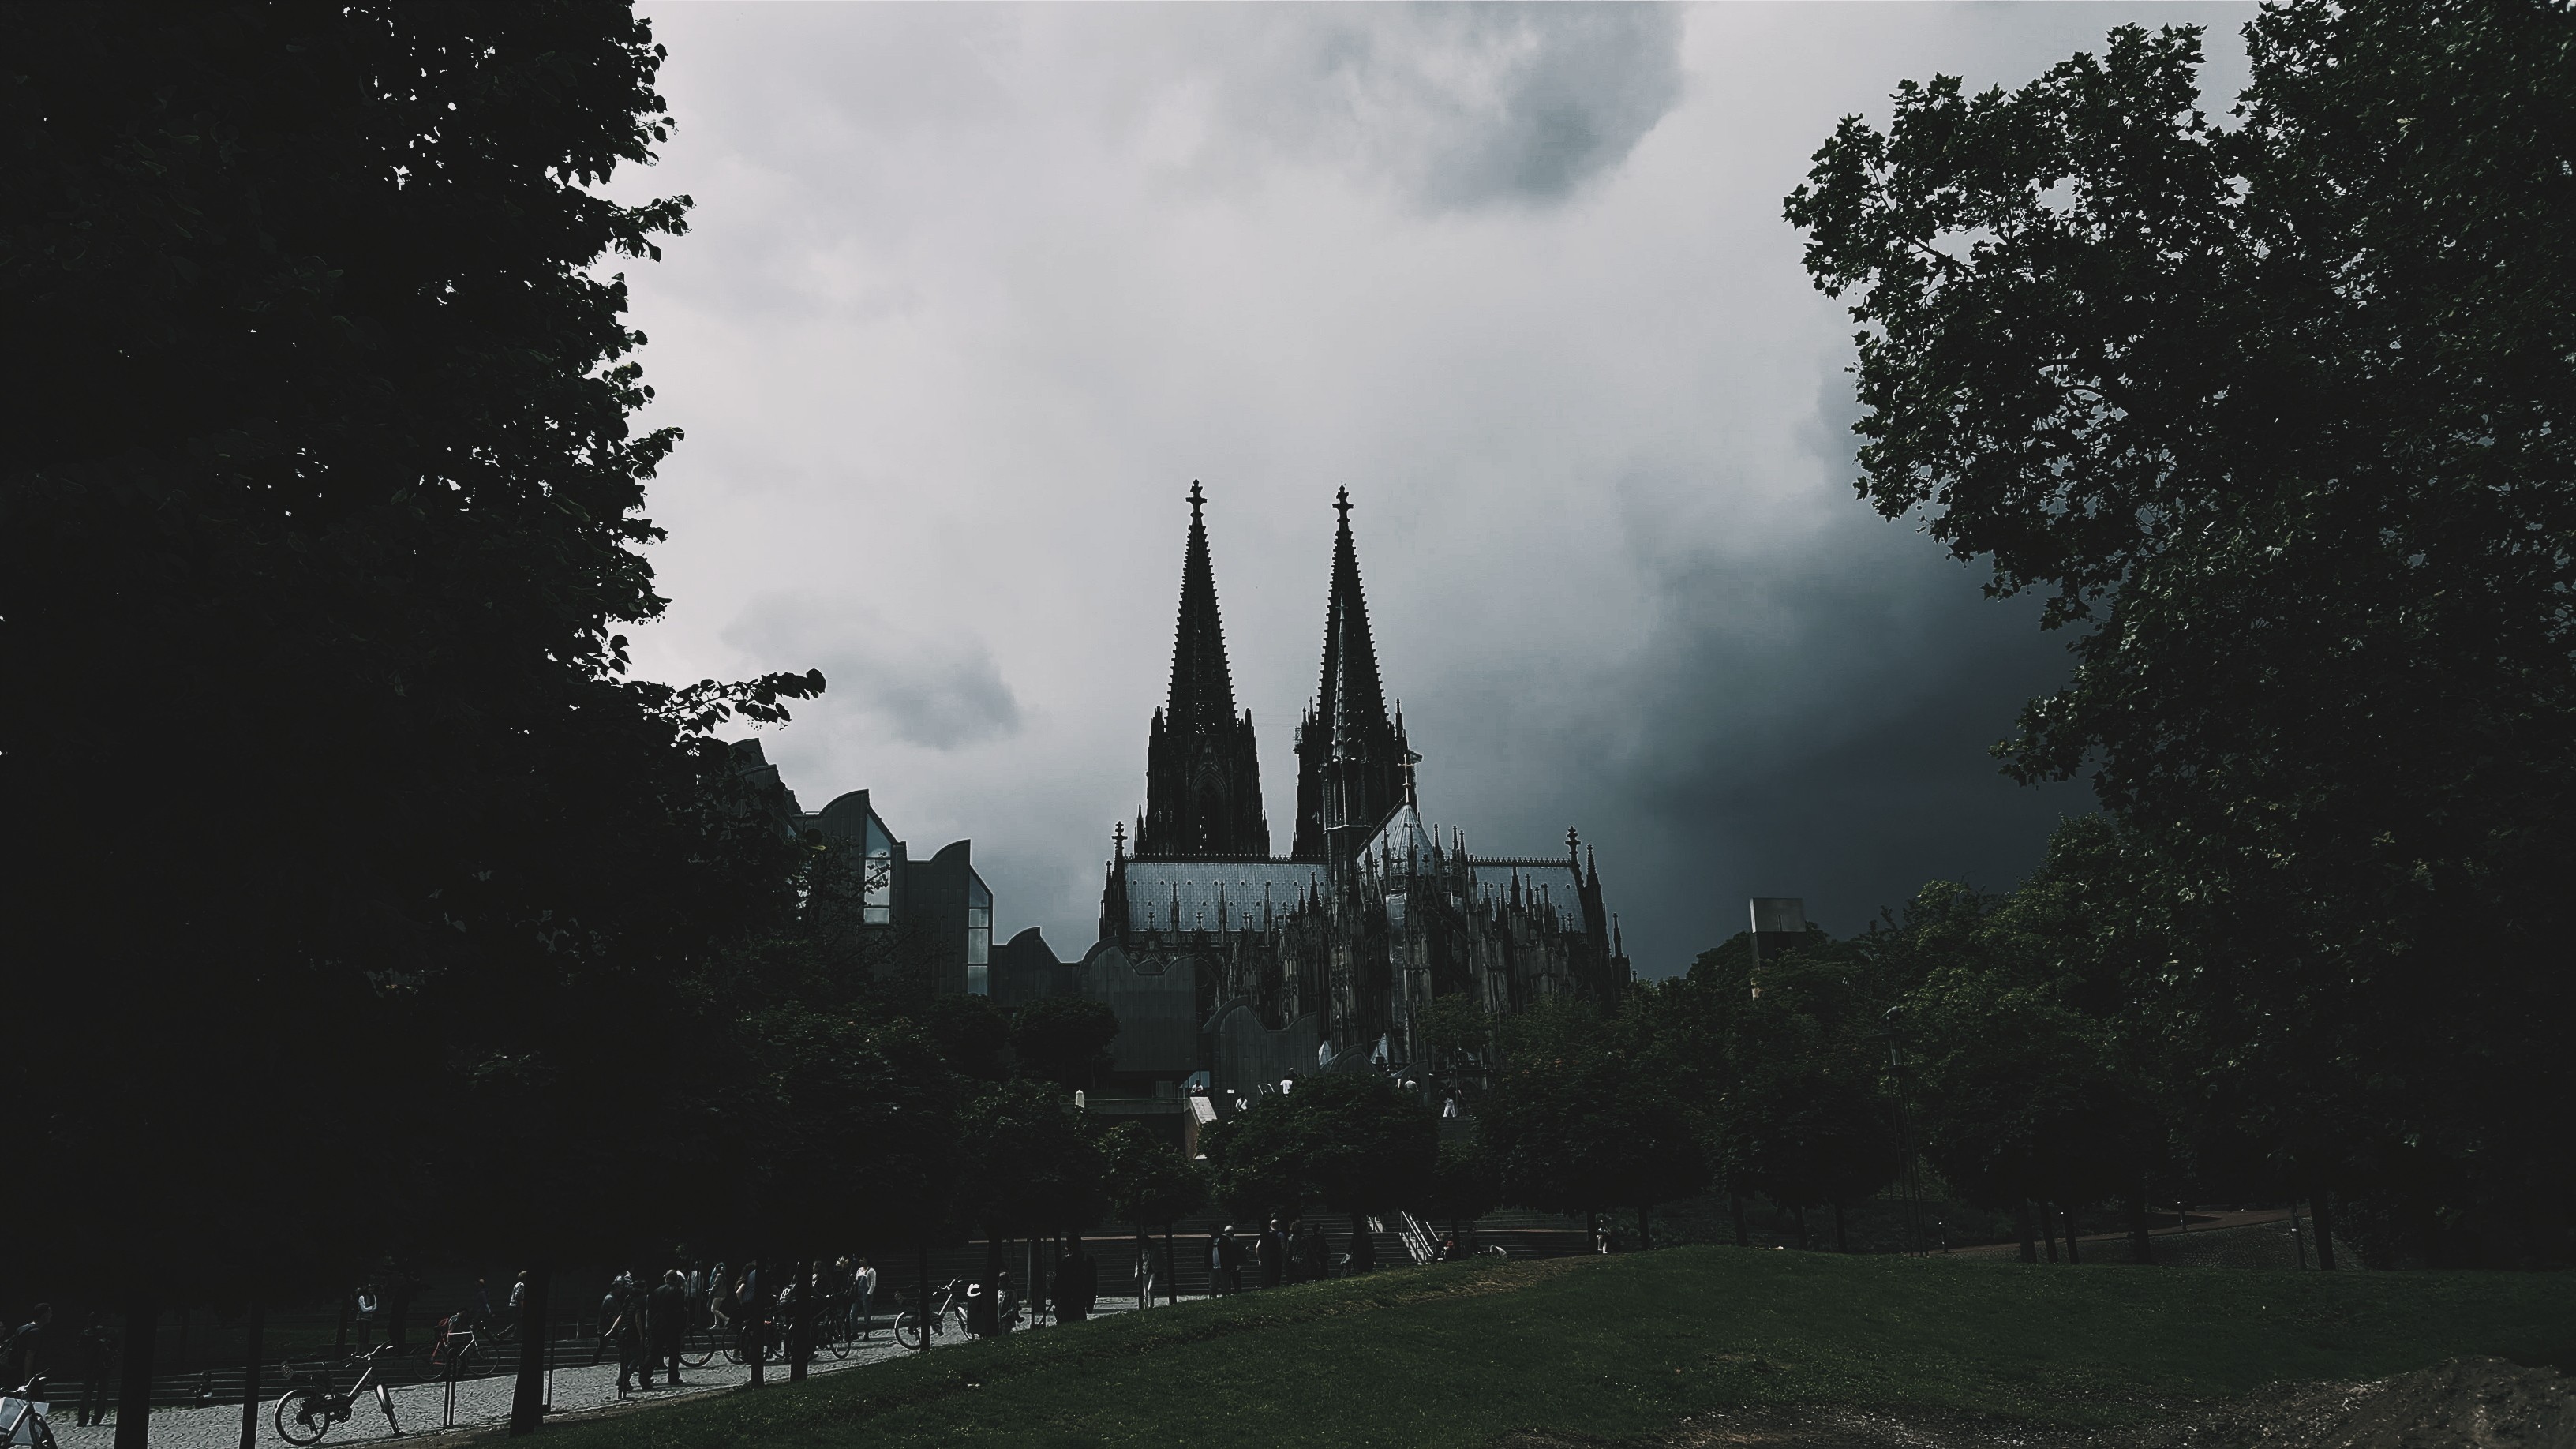 General 3264x1836 Cologne Germany dark clouds park church